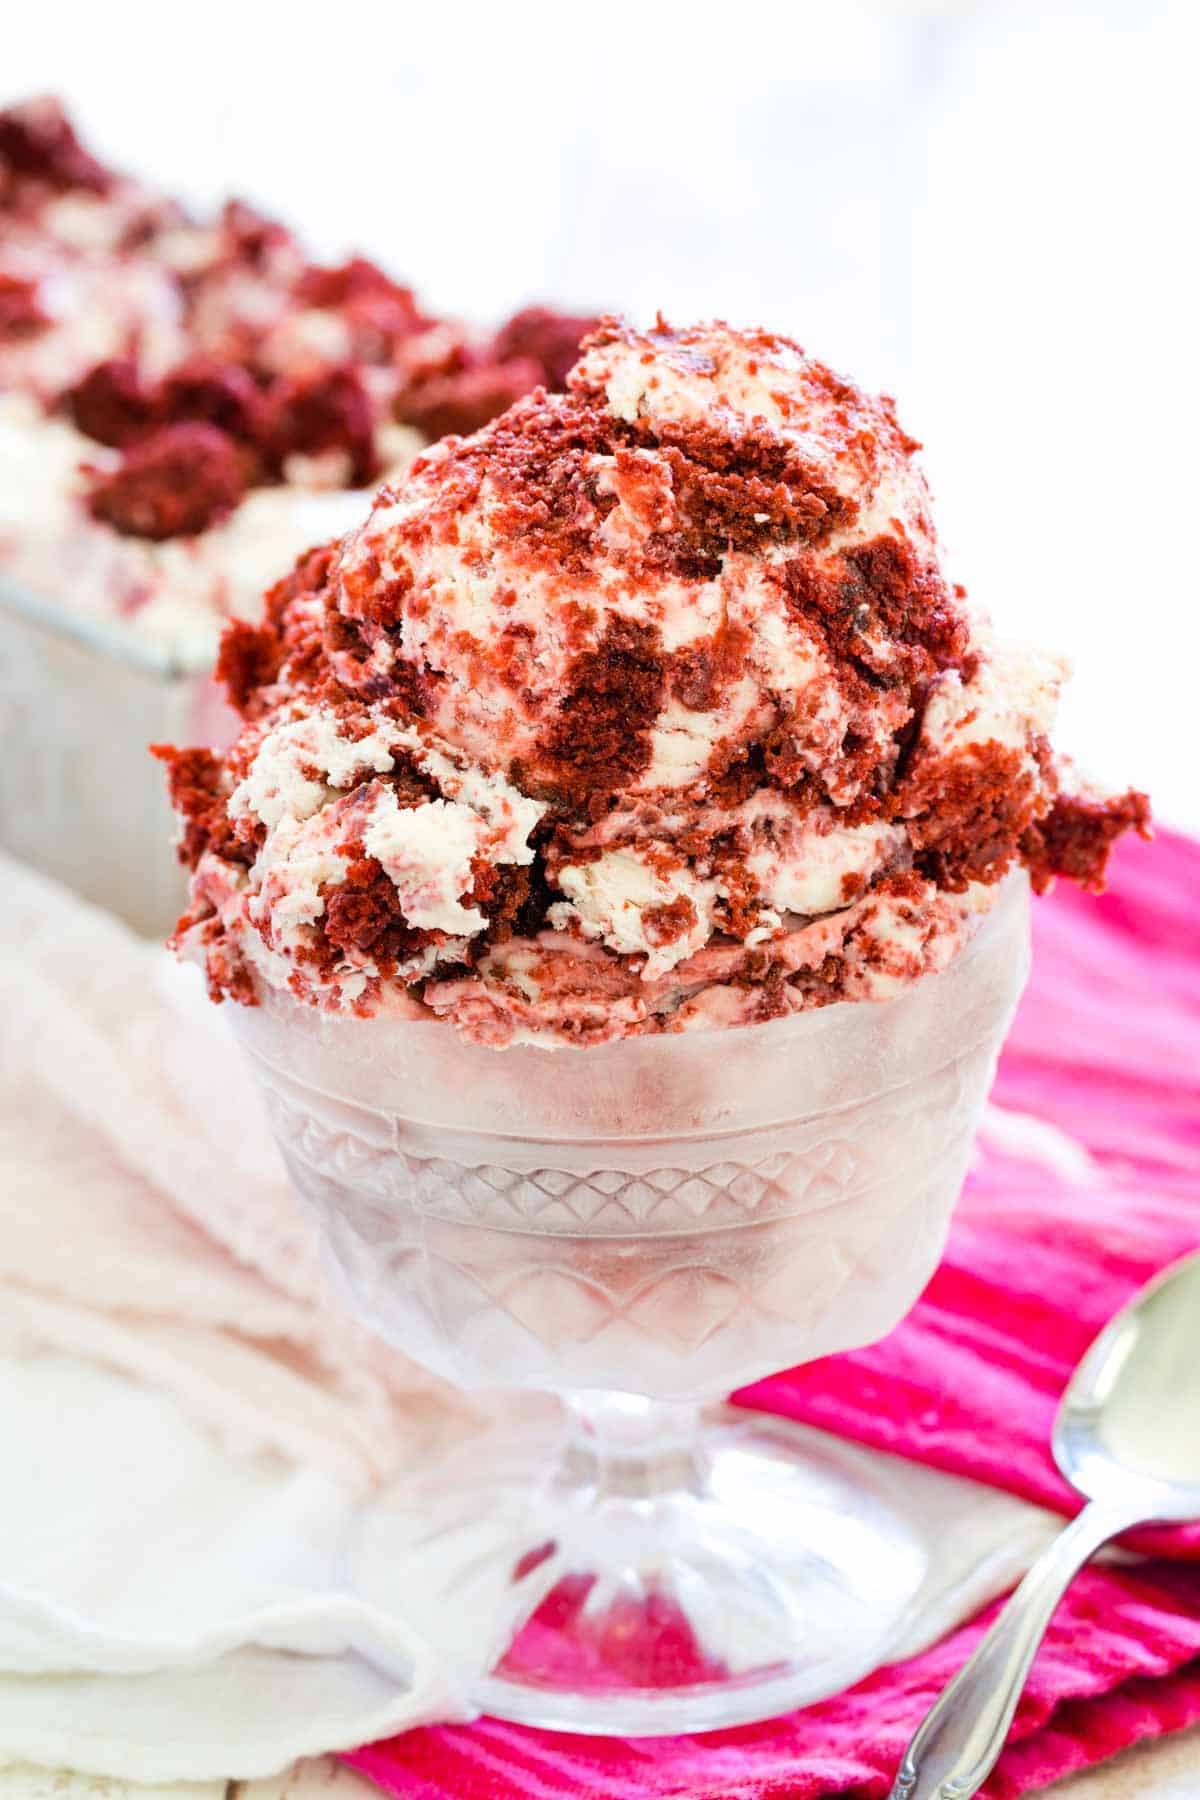 Red and white scoops of velvet ice cream are shown in a glass ice cream dish on a red napkin with a spoon next to it.